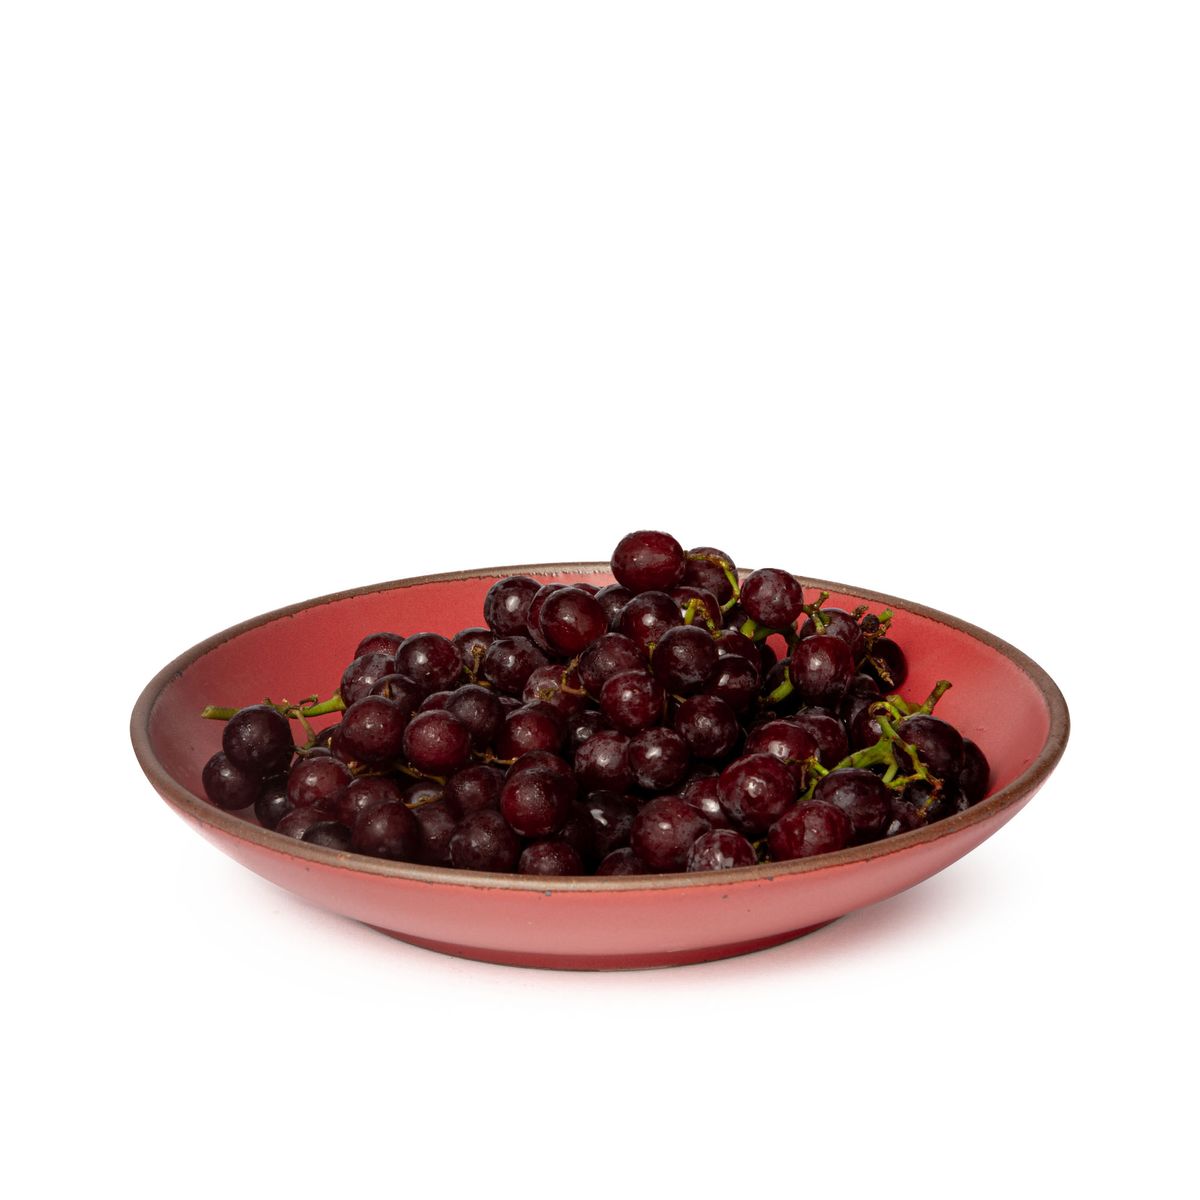 Grapes fill a large ceramic plate with a curved bowl edge in a bold red color featuring iron speckles and an unglazed rim.